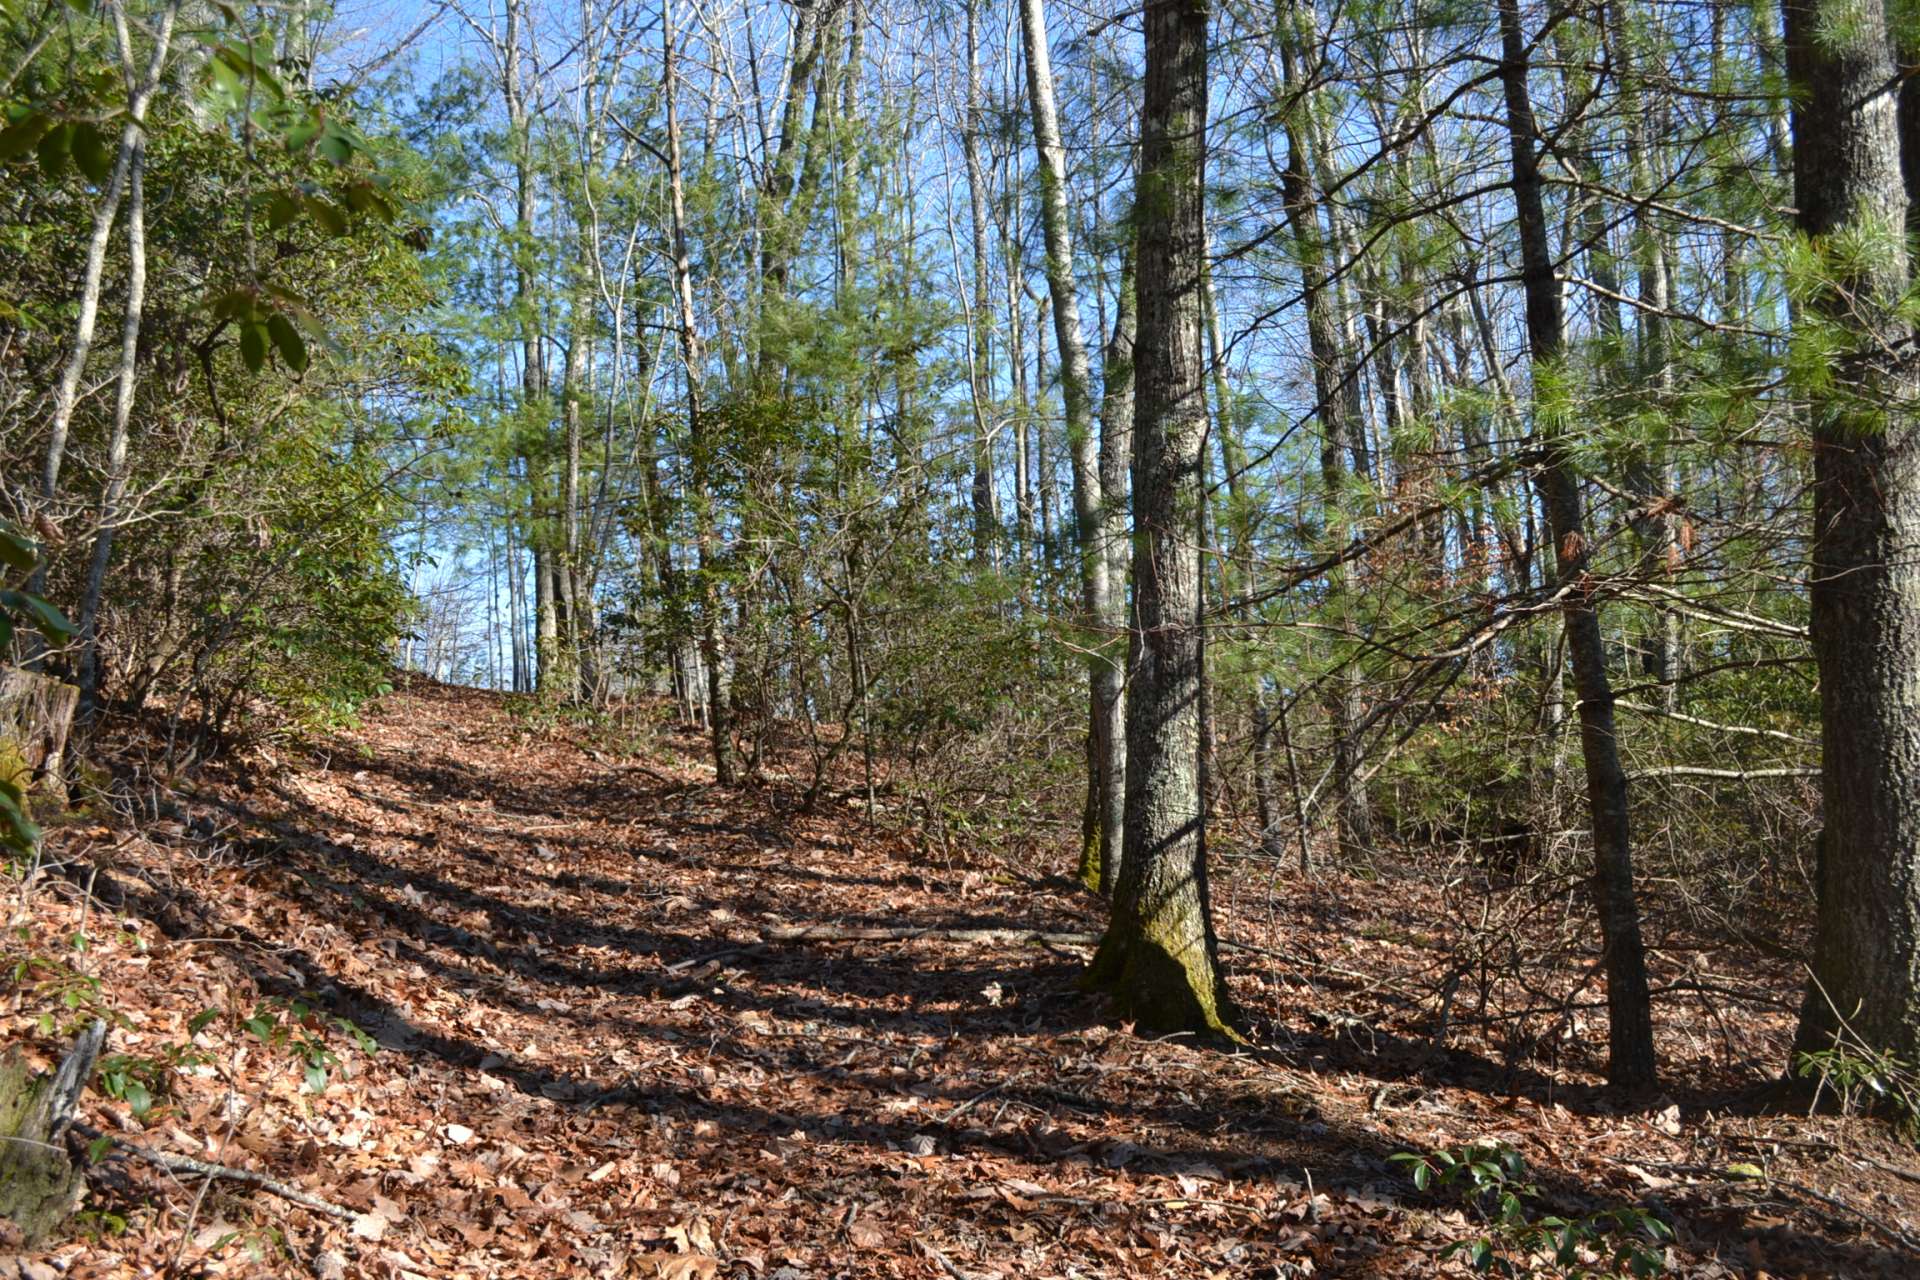 Hiking trails provide for an energizing afternoon stroll.